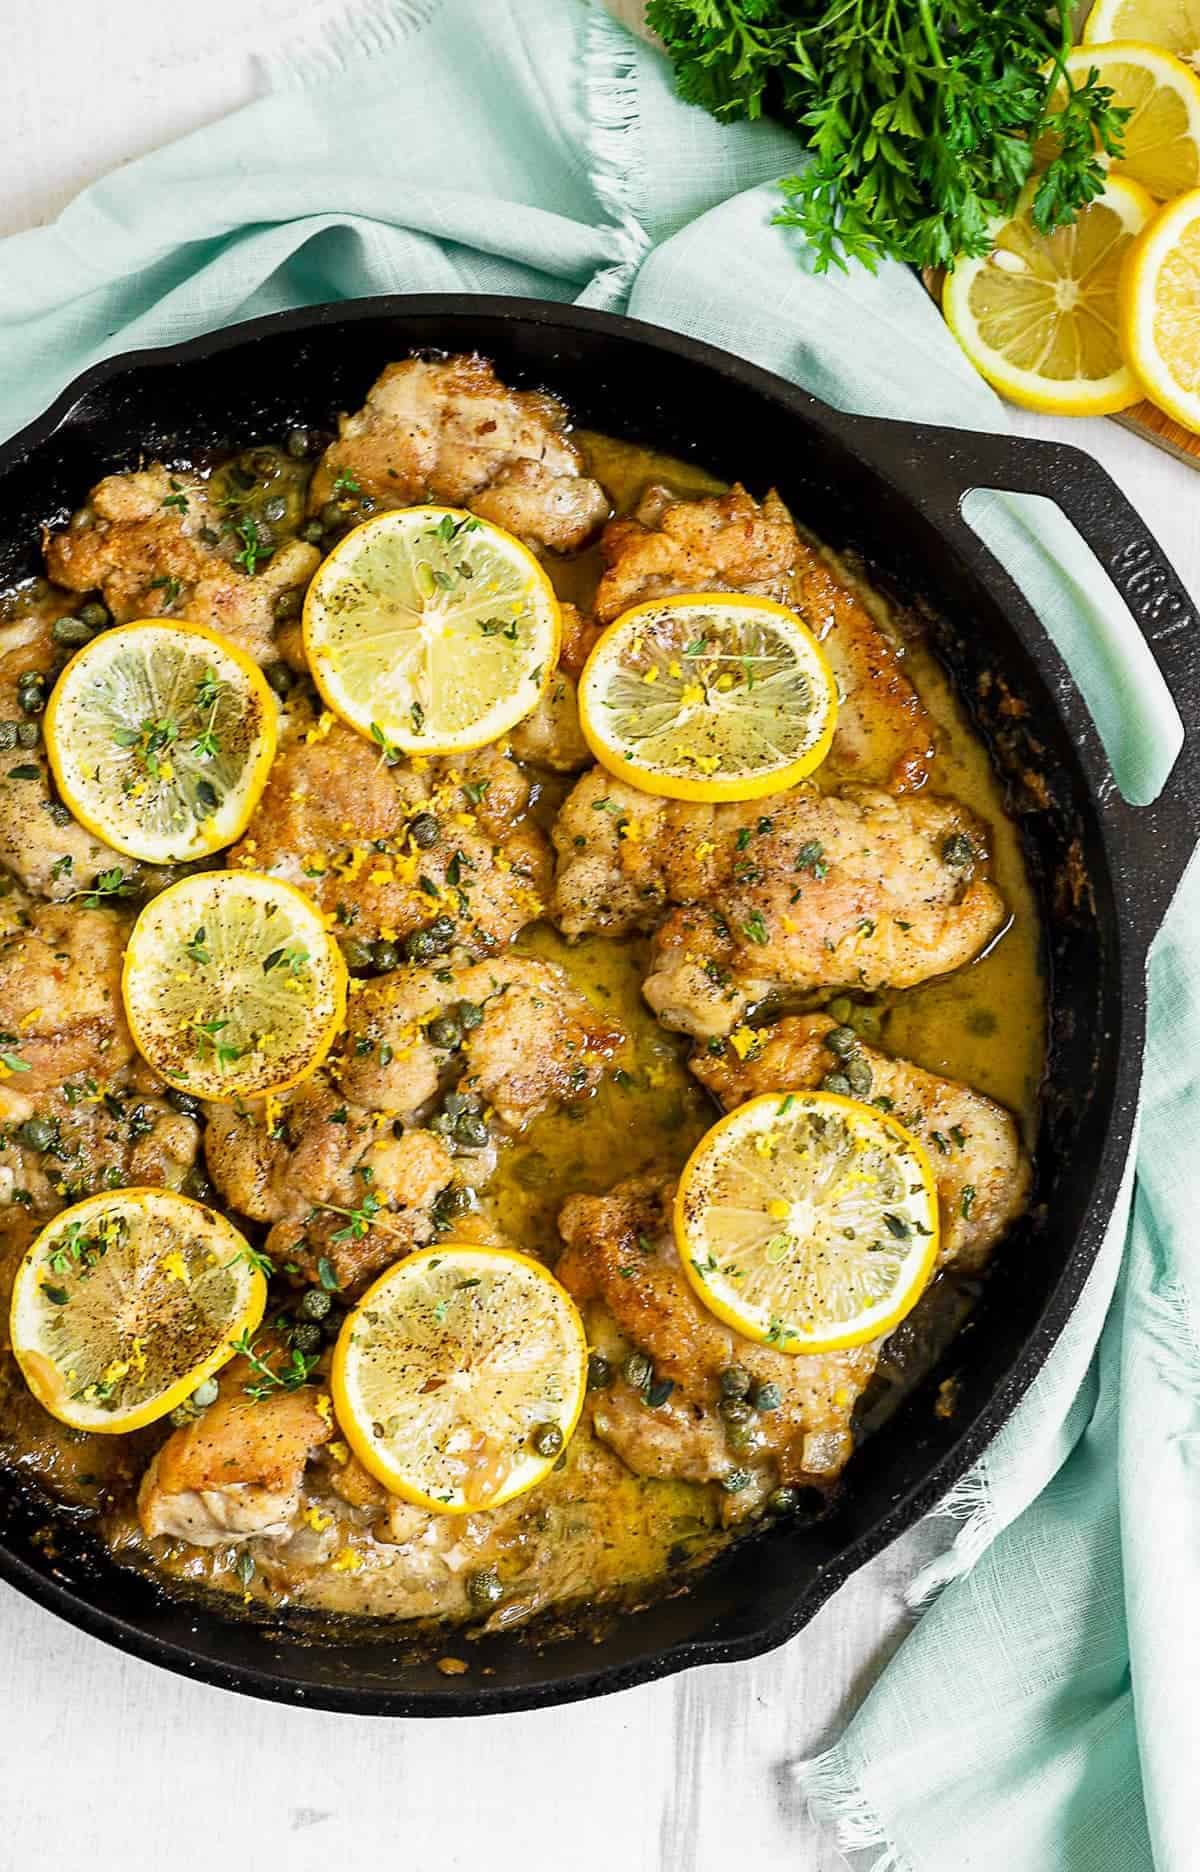 The baked chicken dish in a skillet